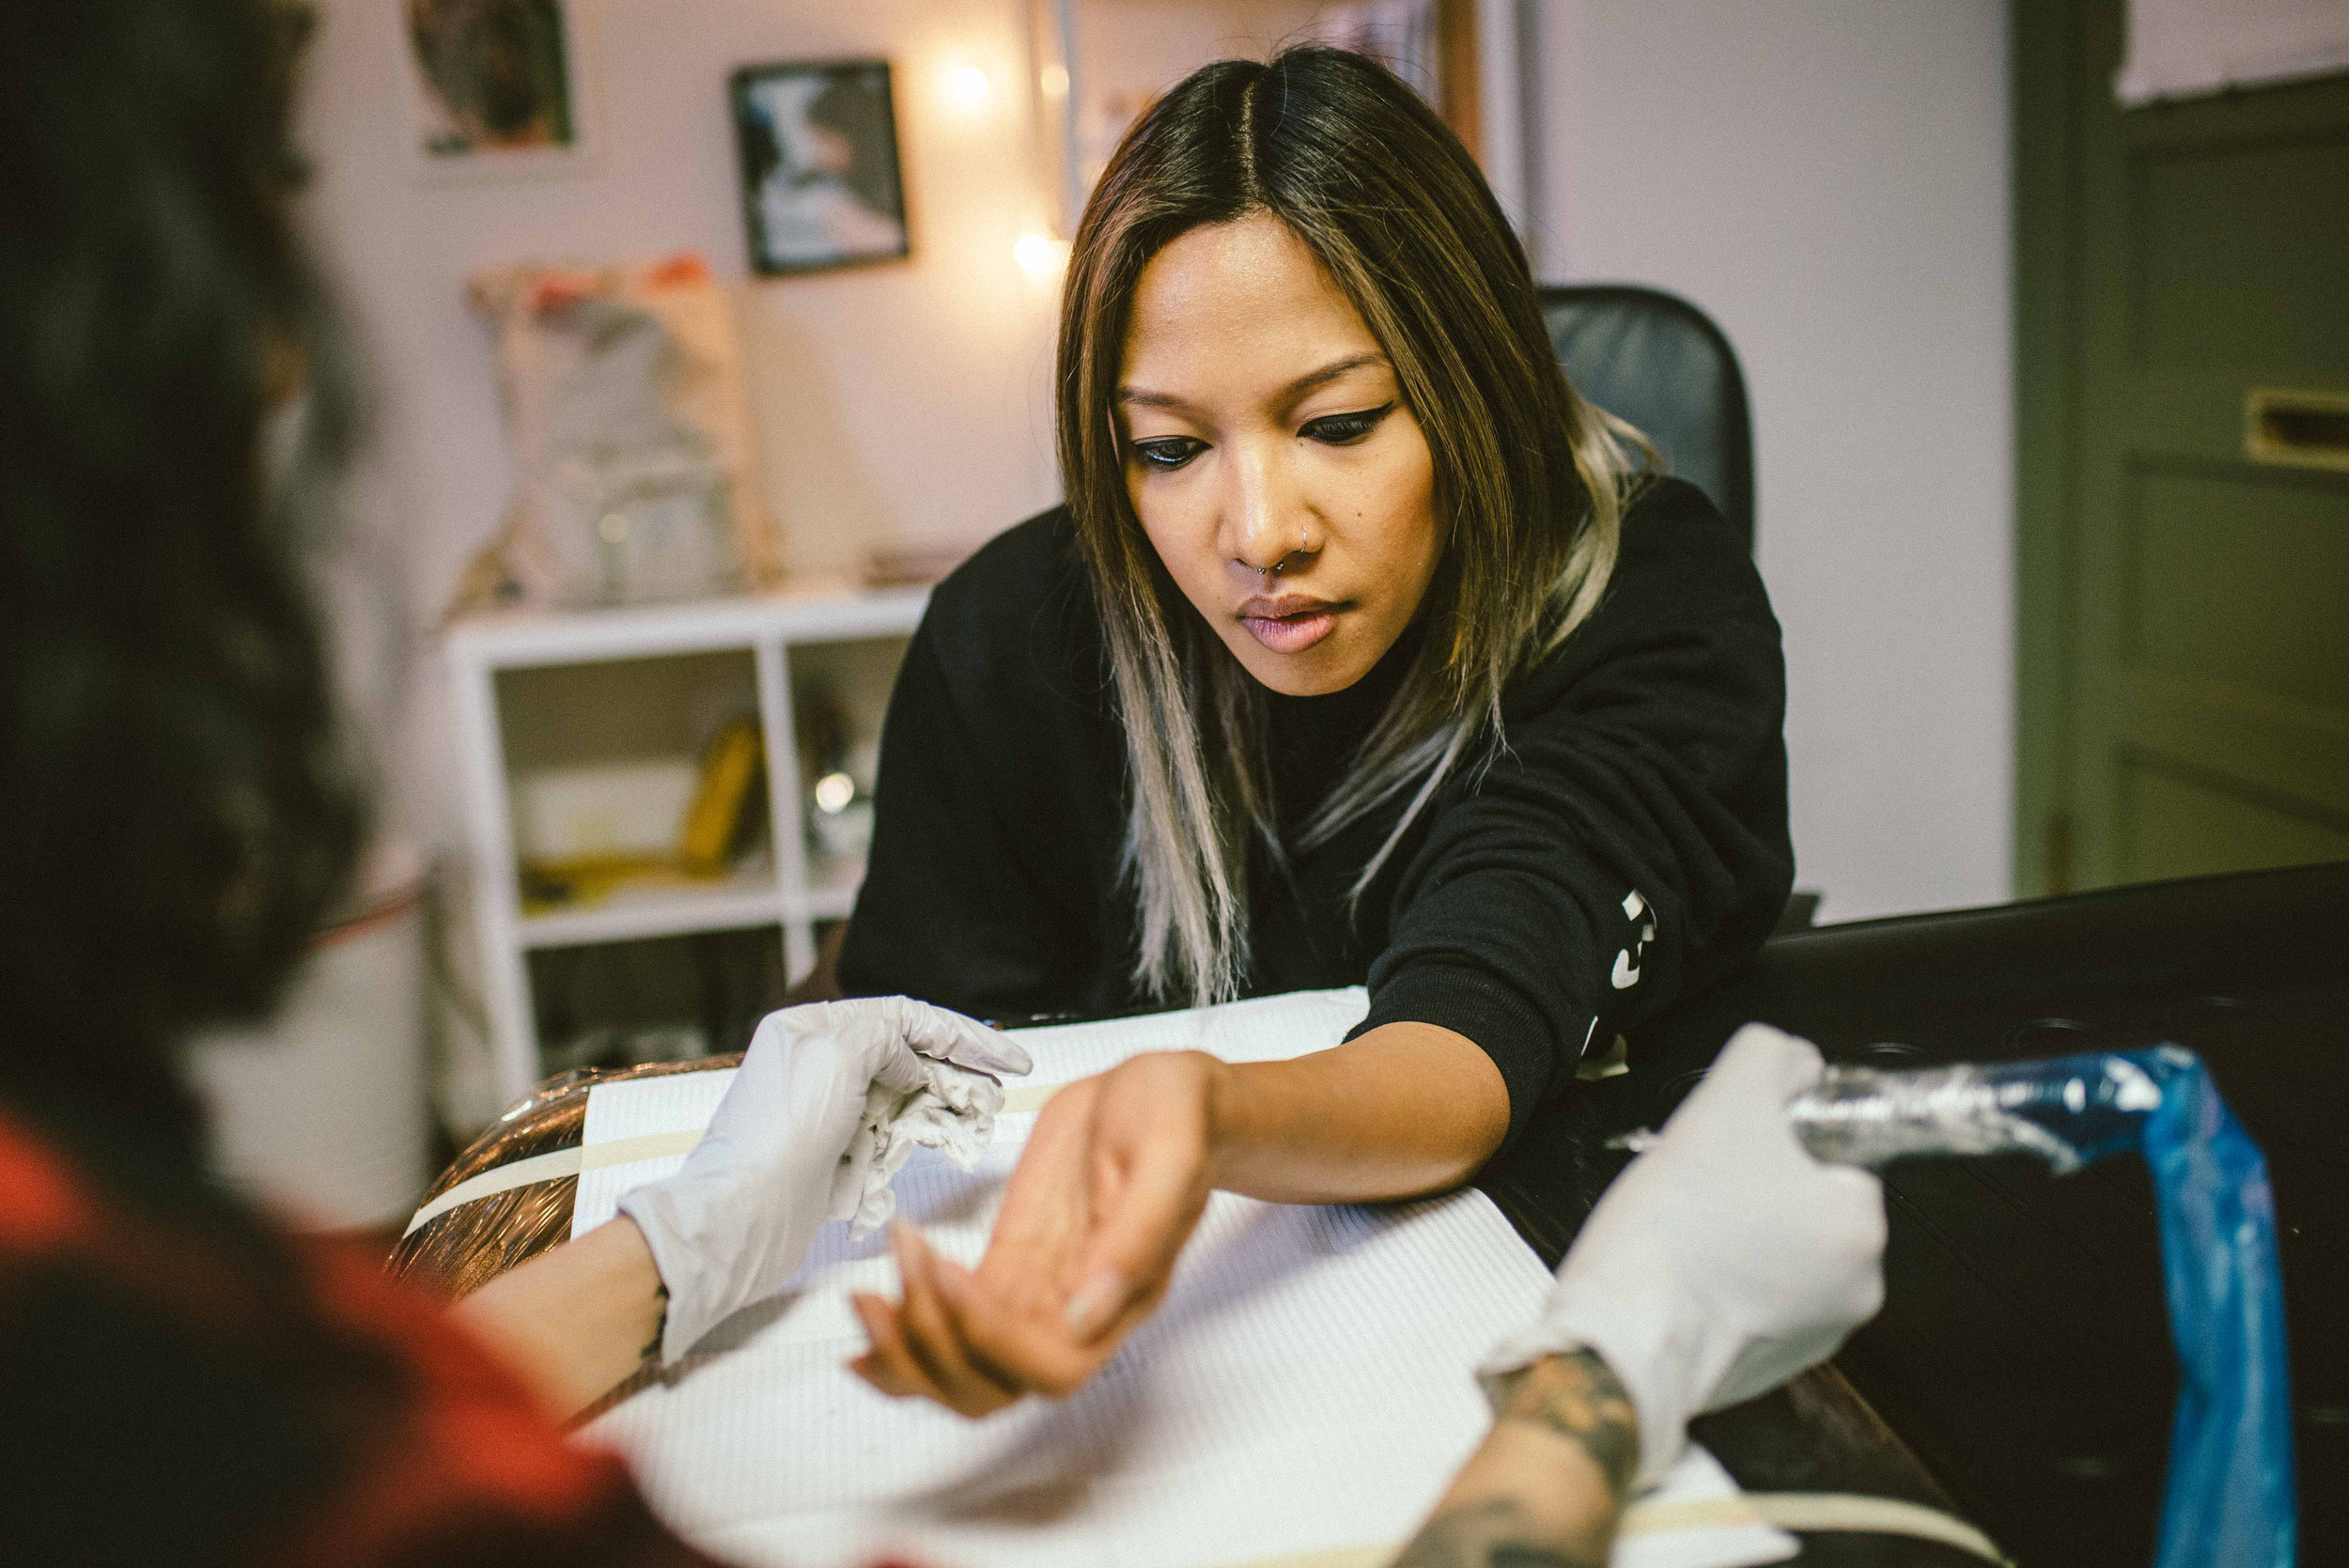  Leslie gets inked by Vanessa the Artist. / Photo: © Diane Abapo for SUSPEND Magazine 